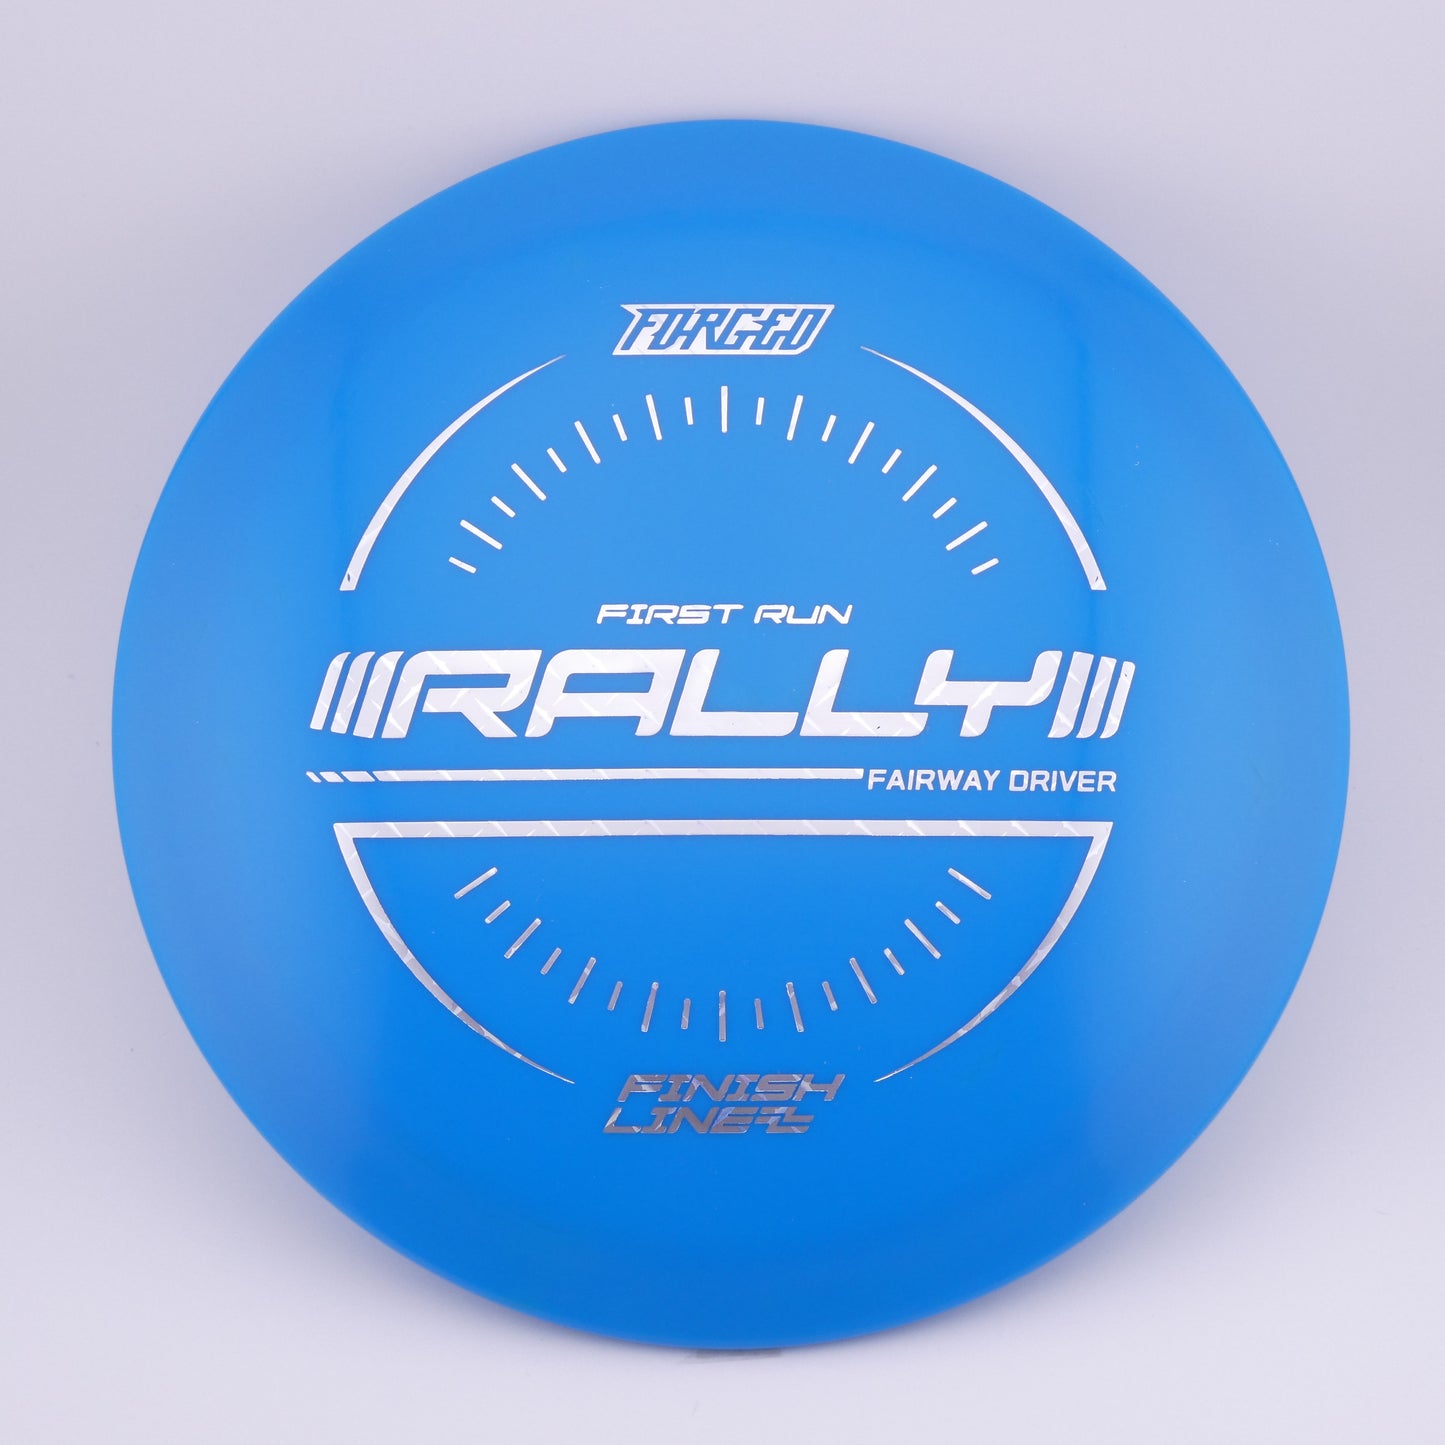 Forged Rally 173-176g